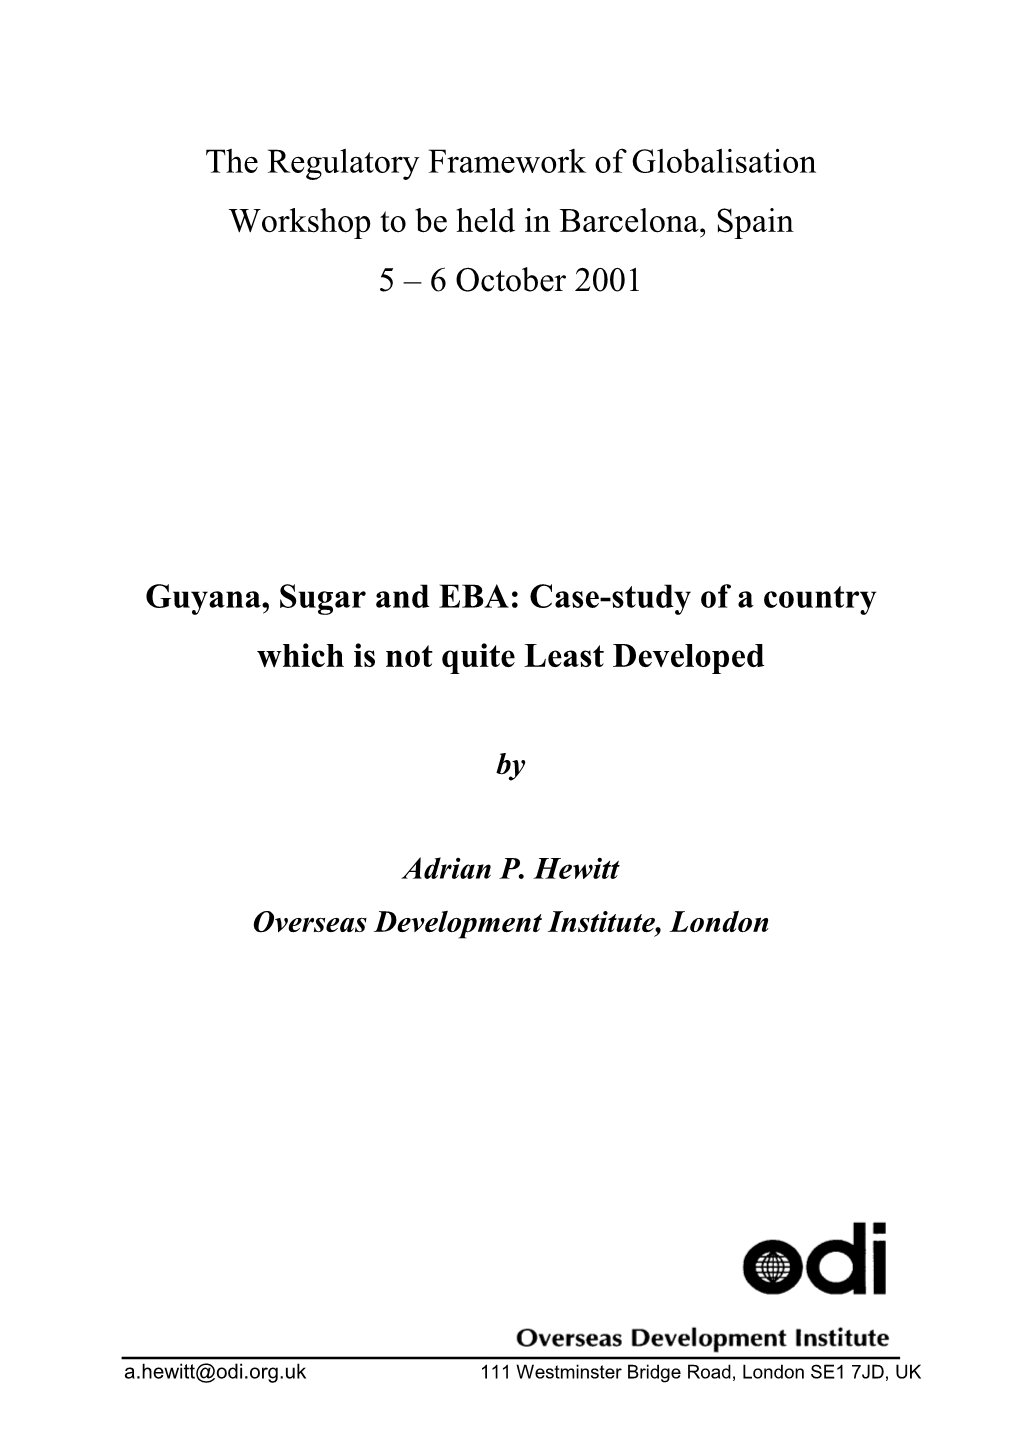 Guyana, Sugar and EBA: Case-Study of a Country Which Is Not Quite Least Developed